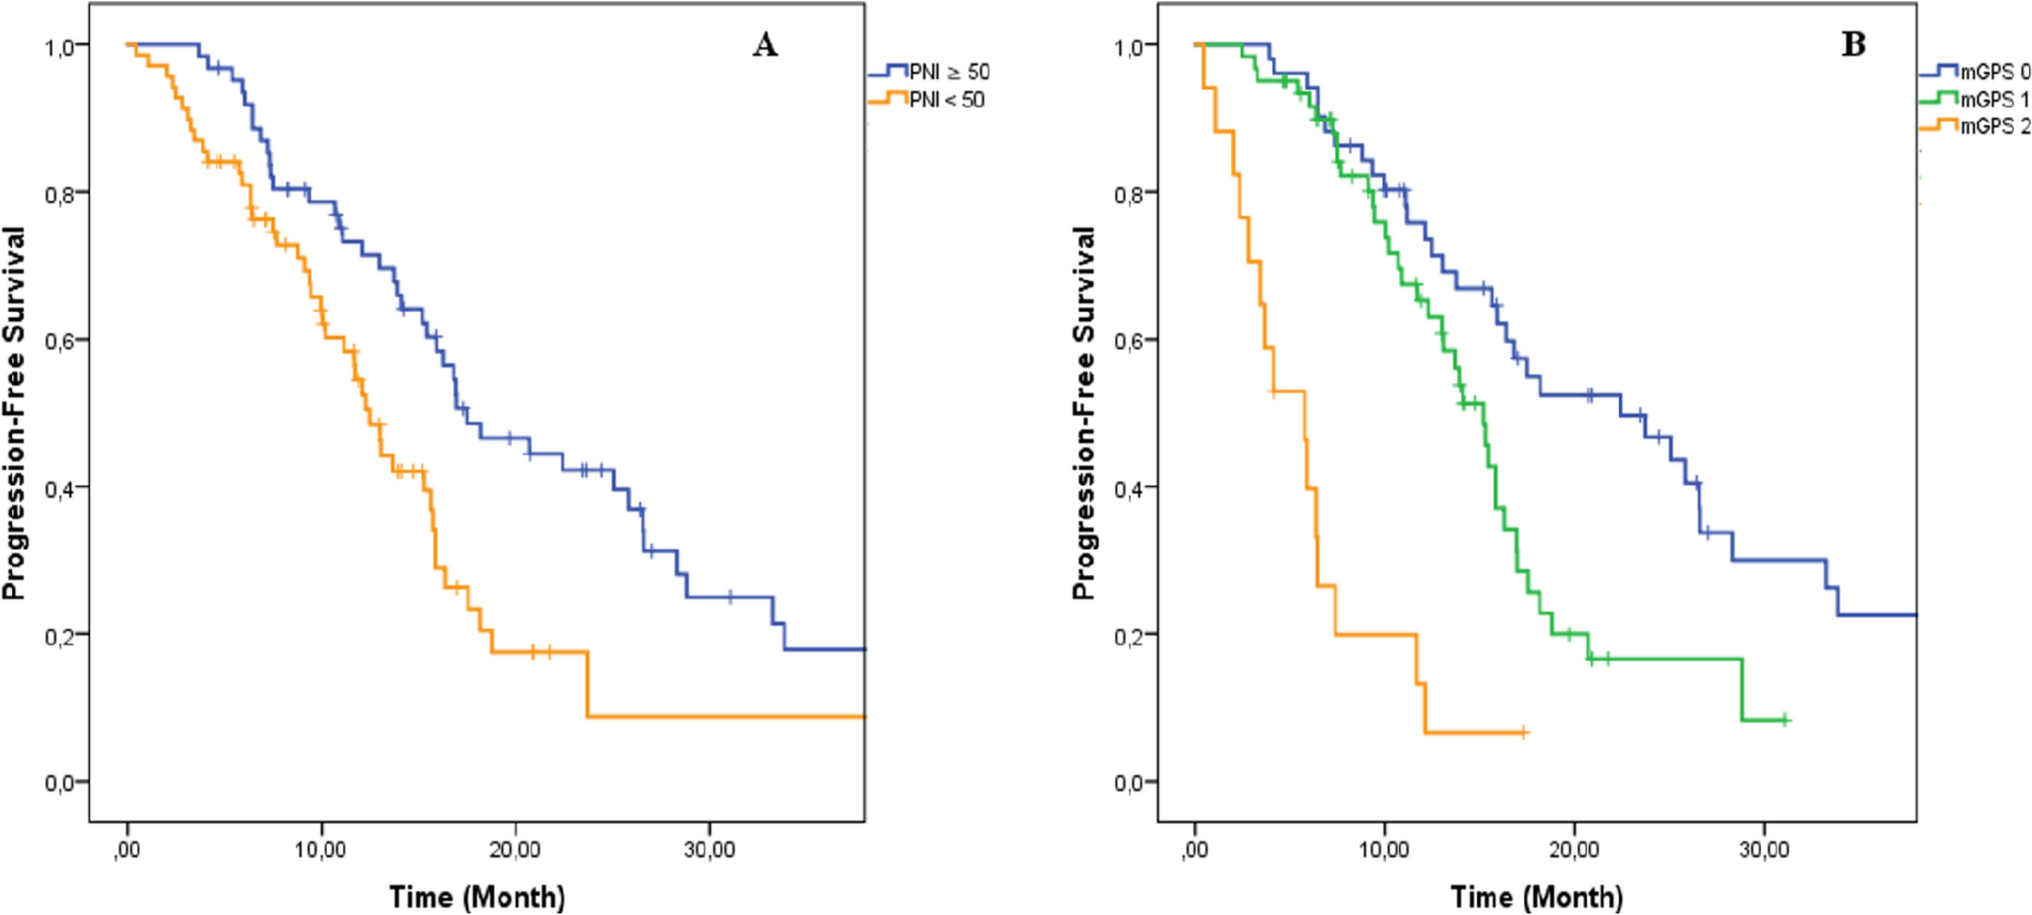 Prognostic importance of prognostic nutritional index and modified Glasgow prognostic score in advanced lung cancer with targetable mutation